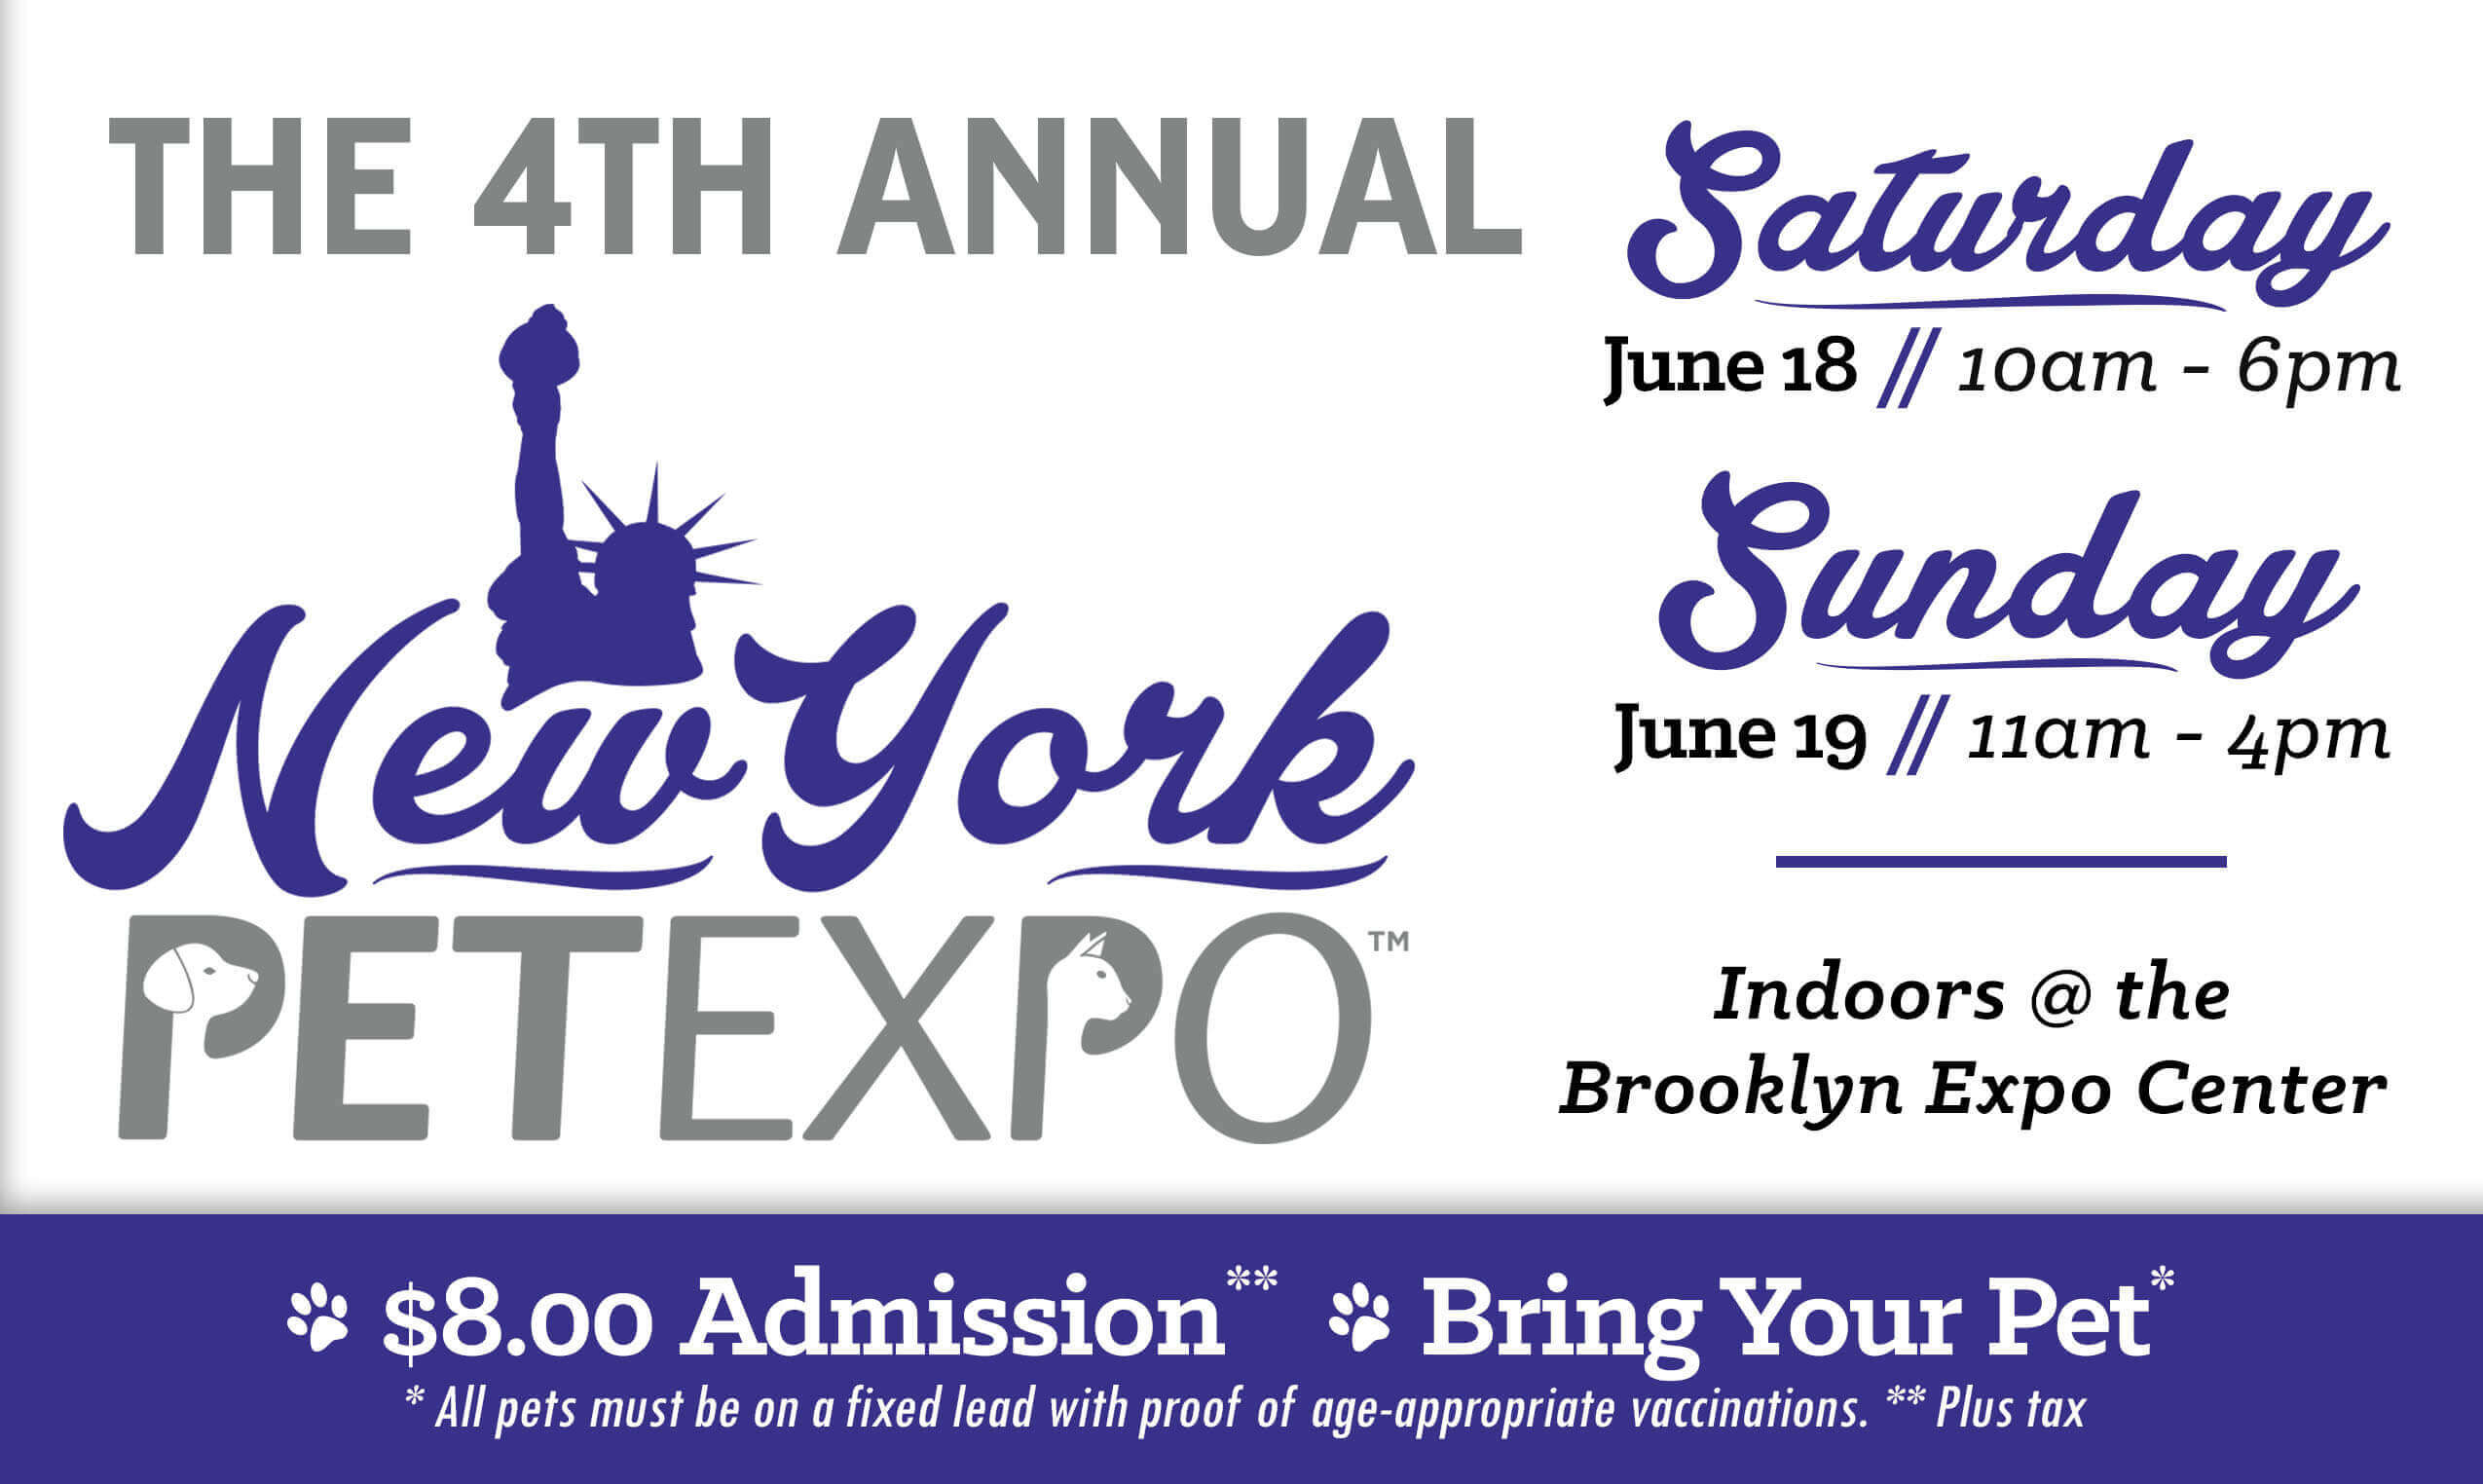 Mark your calendars for New York Pet Expo